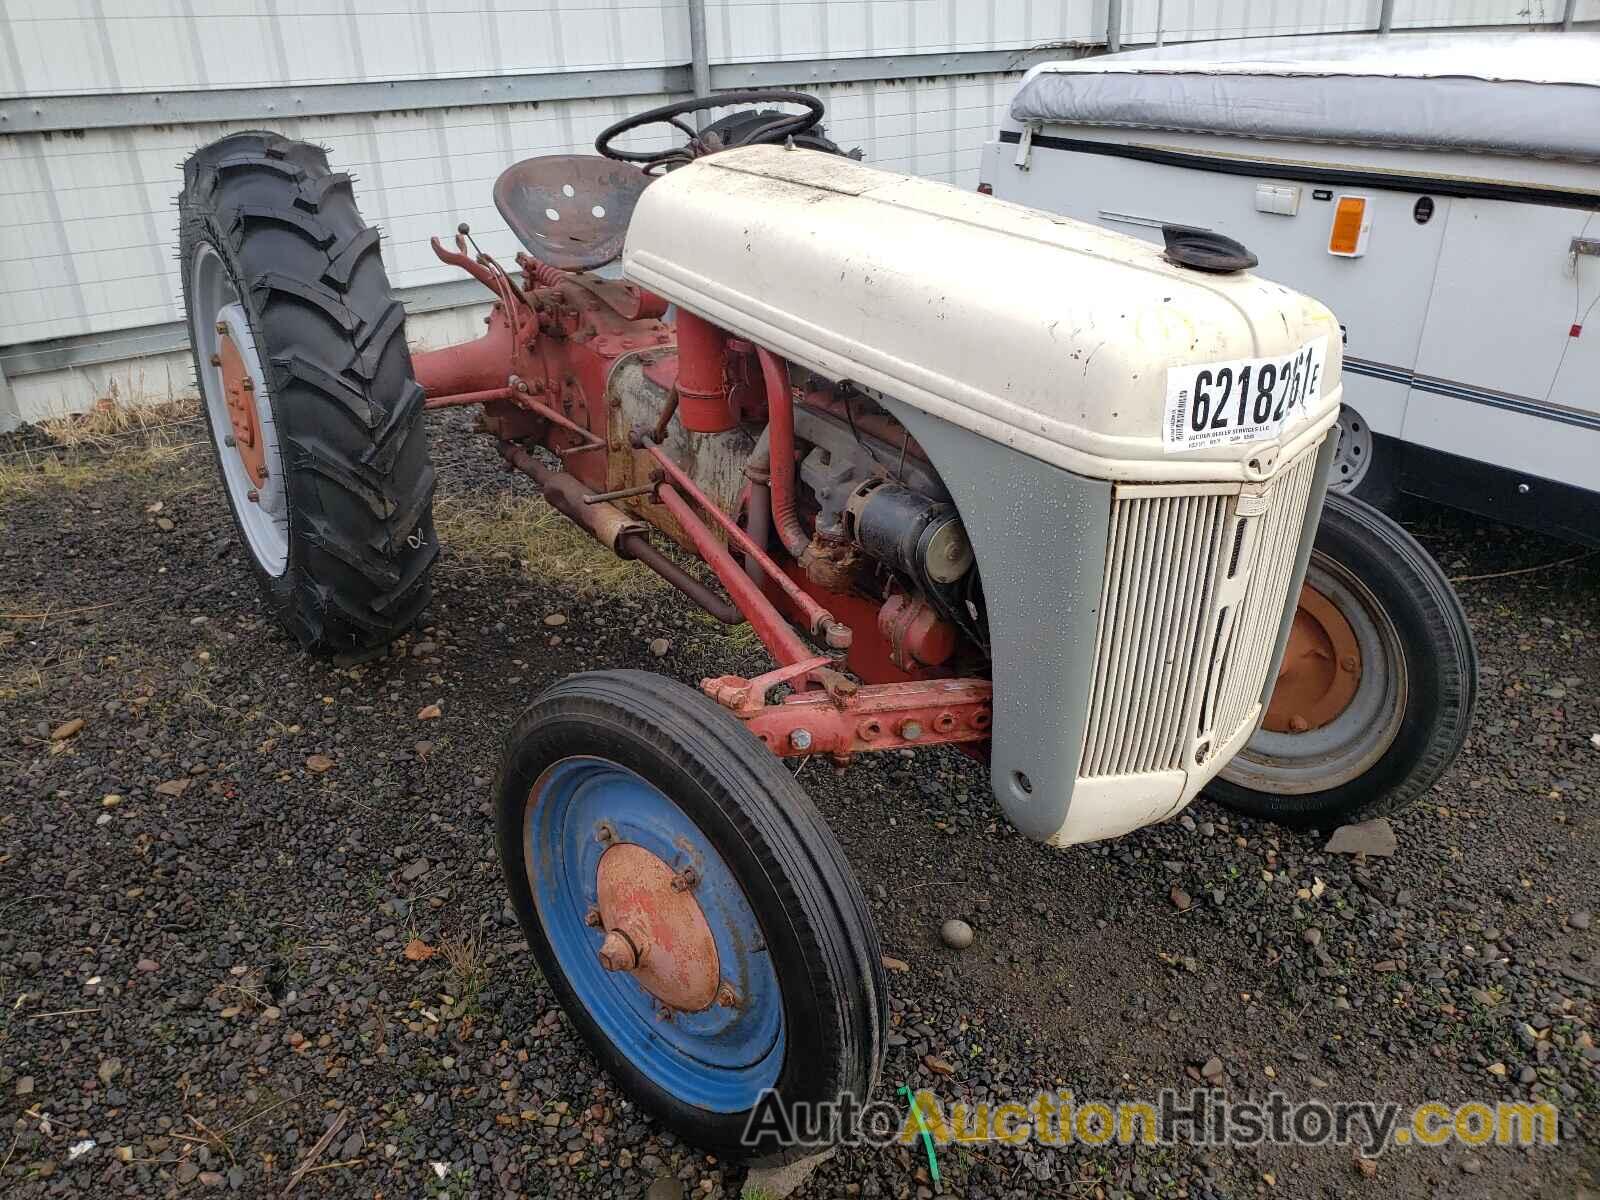 1940 FORD TRACTOR, TRACTOR0000000000